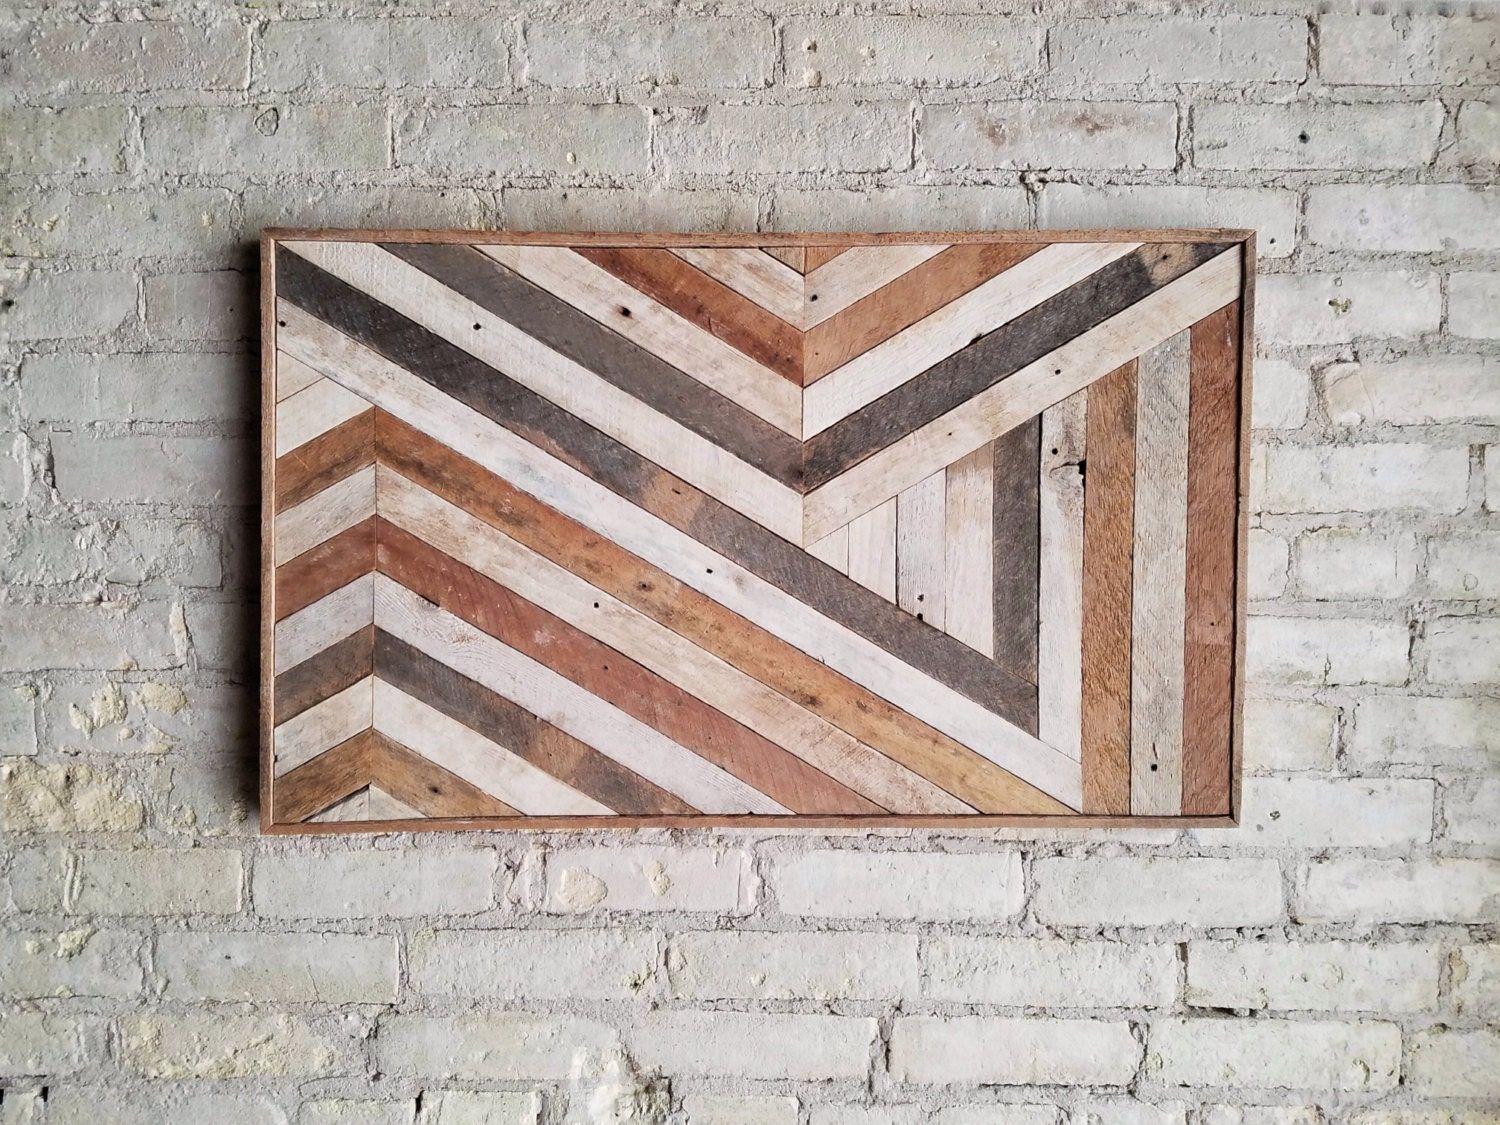 Reclaimed Wood Wall Art, Wall Decor, Abstract Chevron Pertaining To Most Up To Date Abstract Wood Wall Art (View 5 of 20)